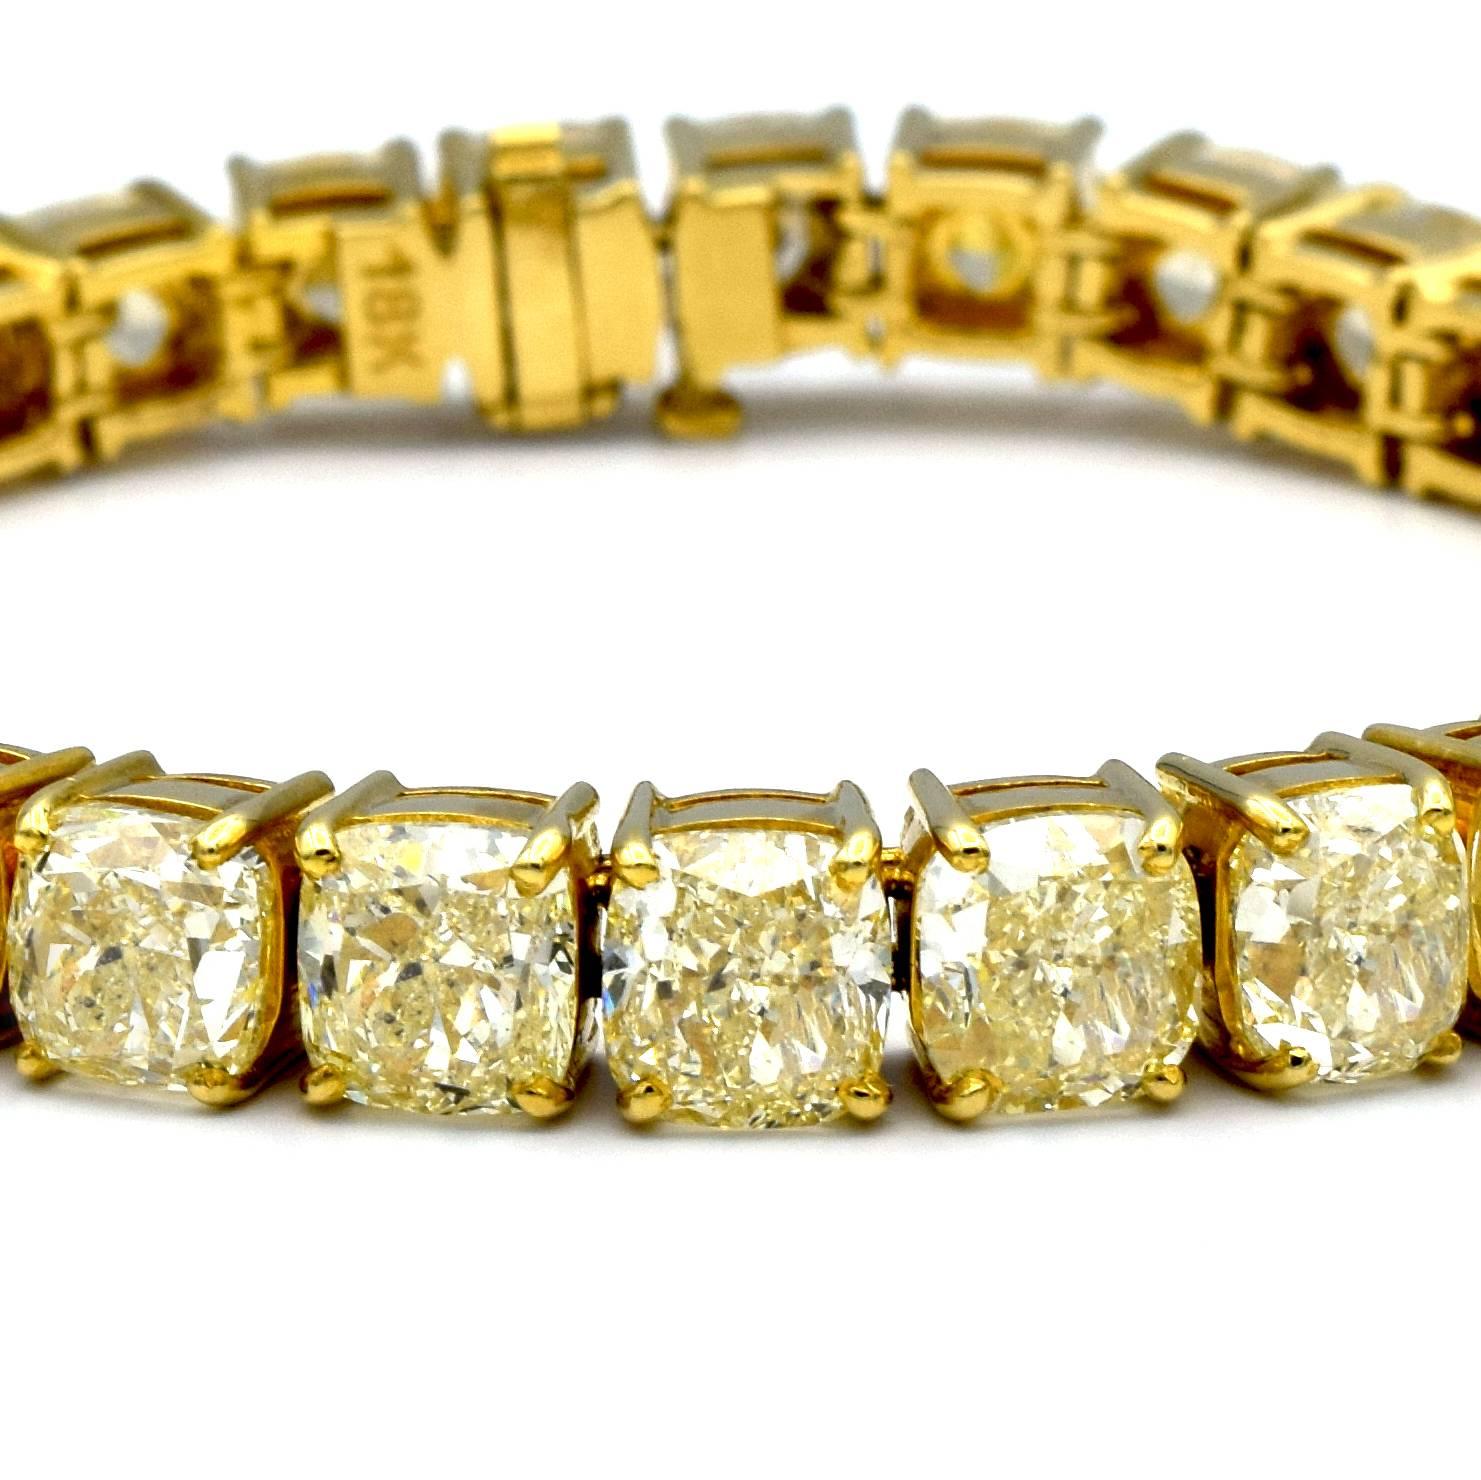 TENNIS BRAC 18KYG 31ST CU 47.13CTW     
This amazing bracelet features 31 natural yellow diamonds totaling 47.13 carats. 
Set in 18K yellow gold, these beautiful, Cushion-cut diamonds, weighing approximately 1.50 carats each, sparkle with